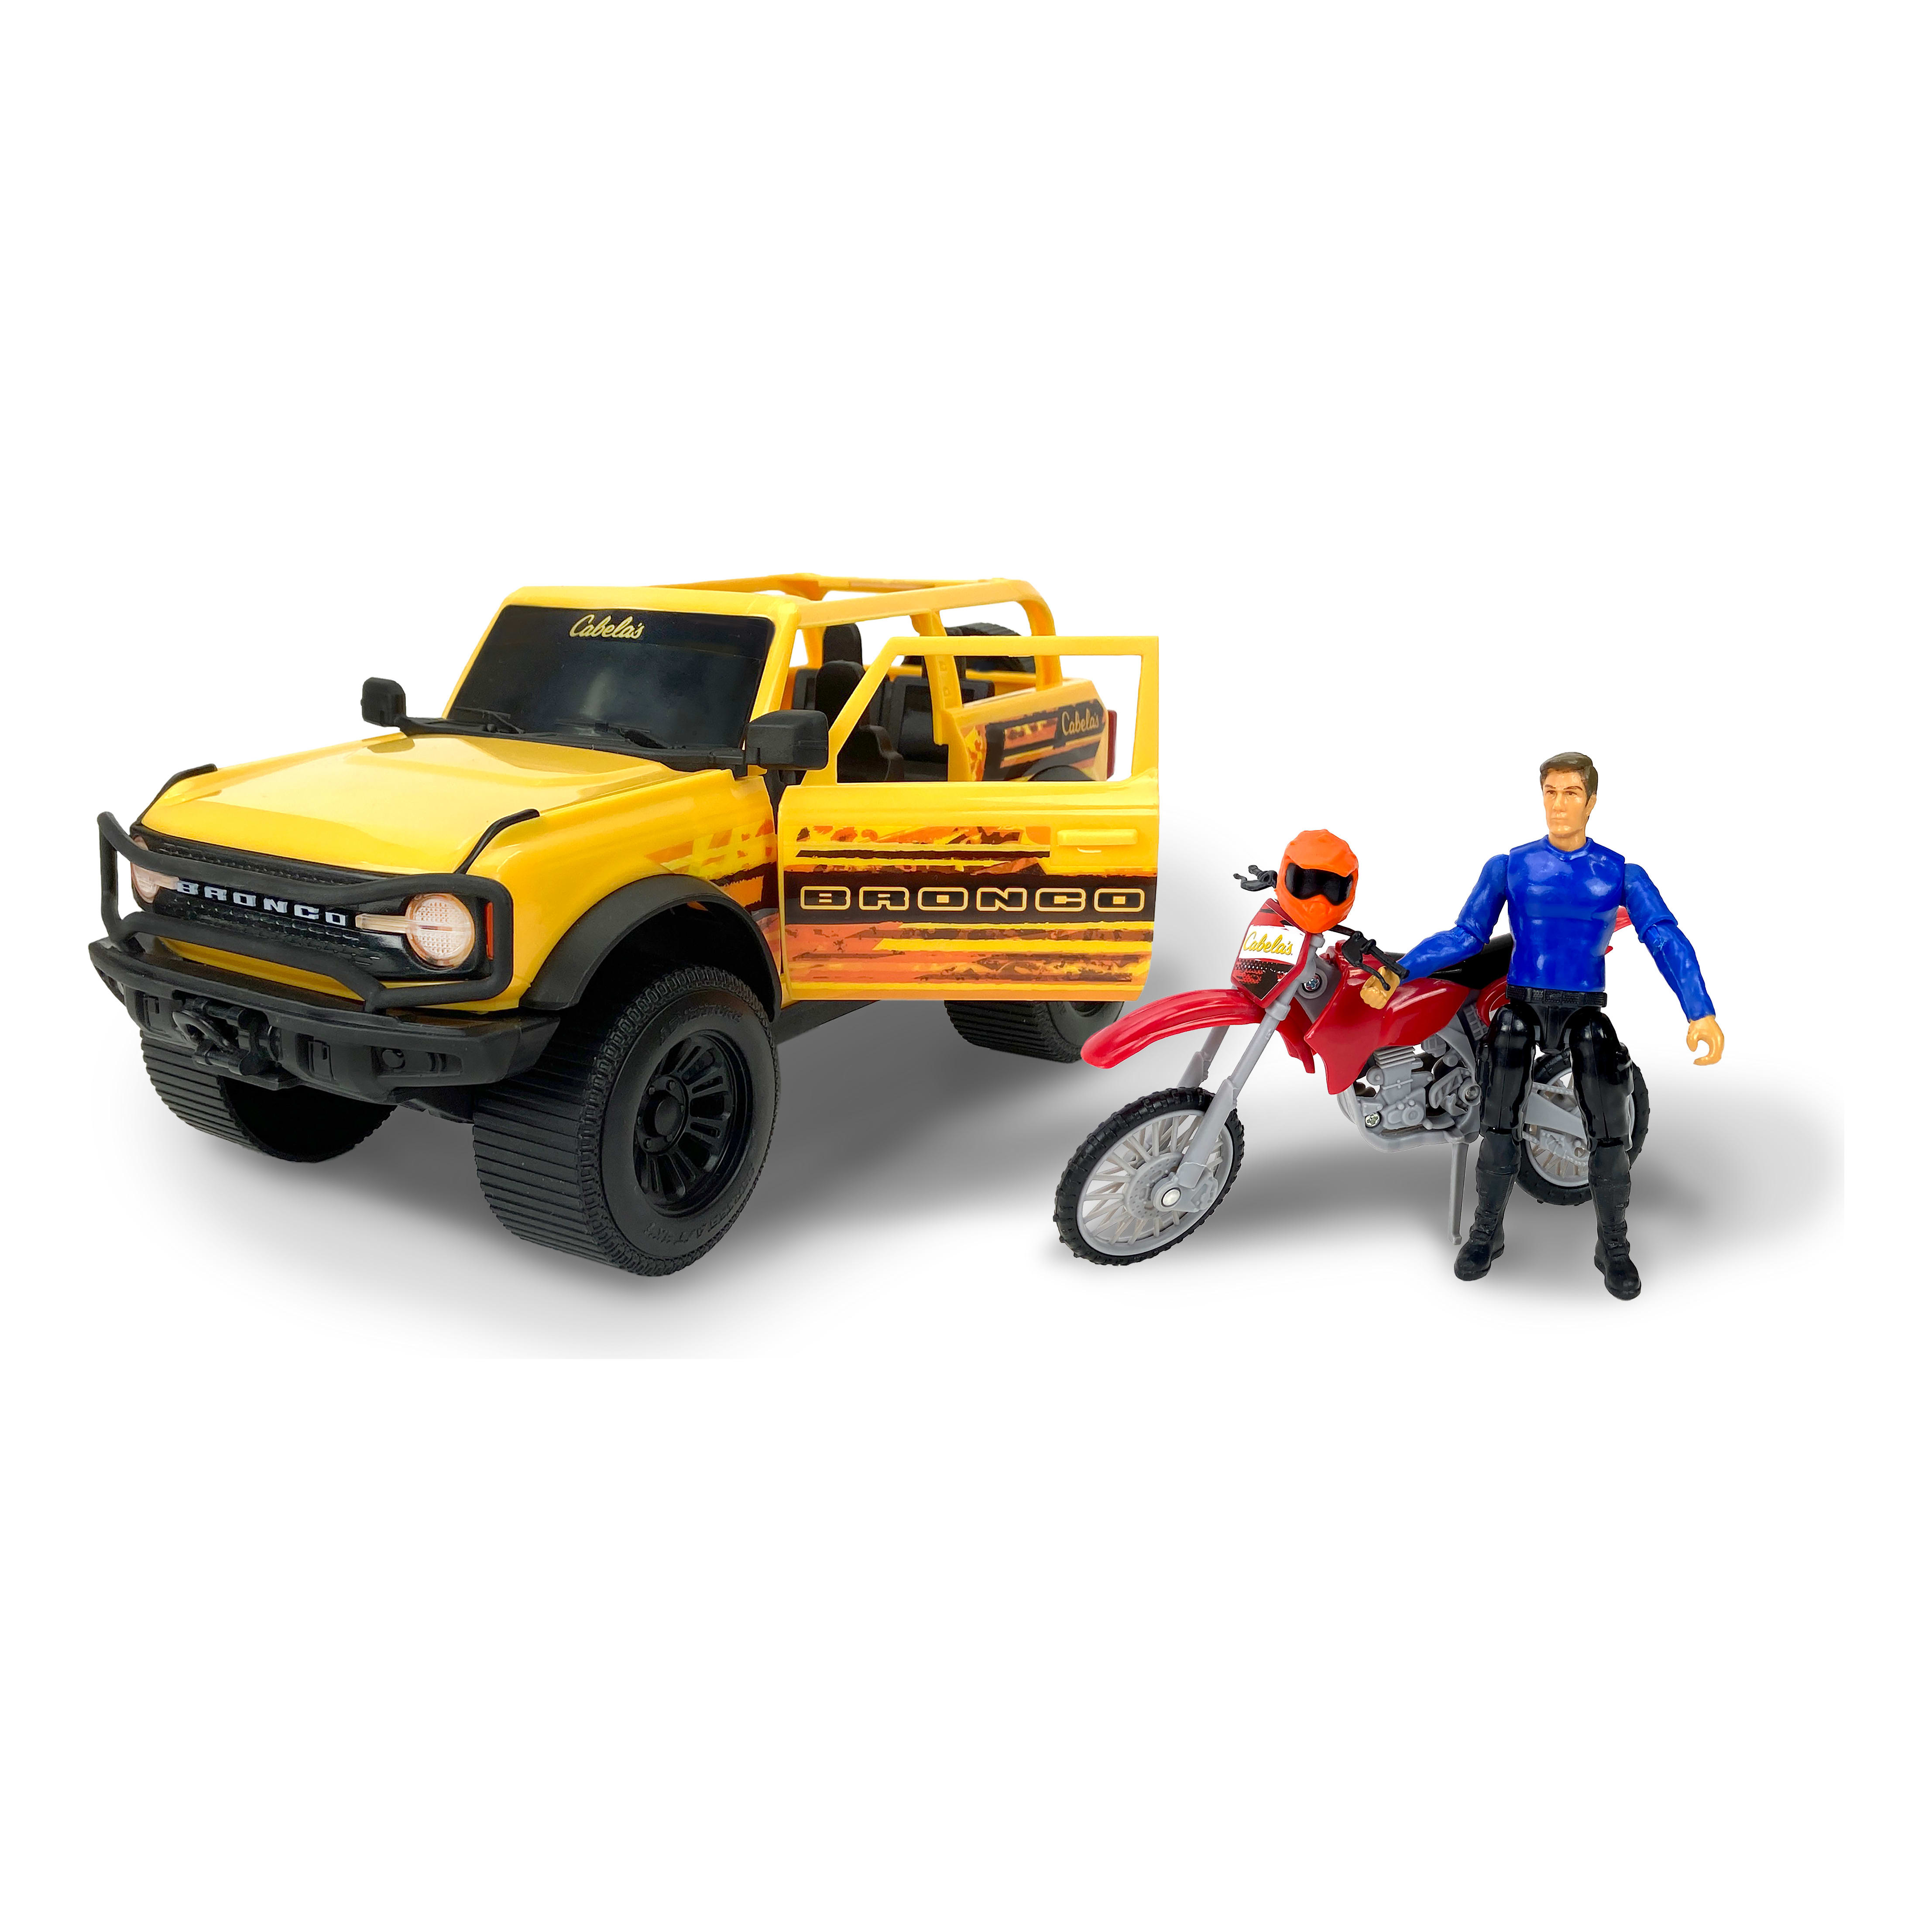 Cabela's® Imagination Adventure New Ford® Bronco Off-Road Playset